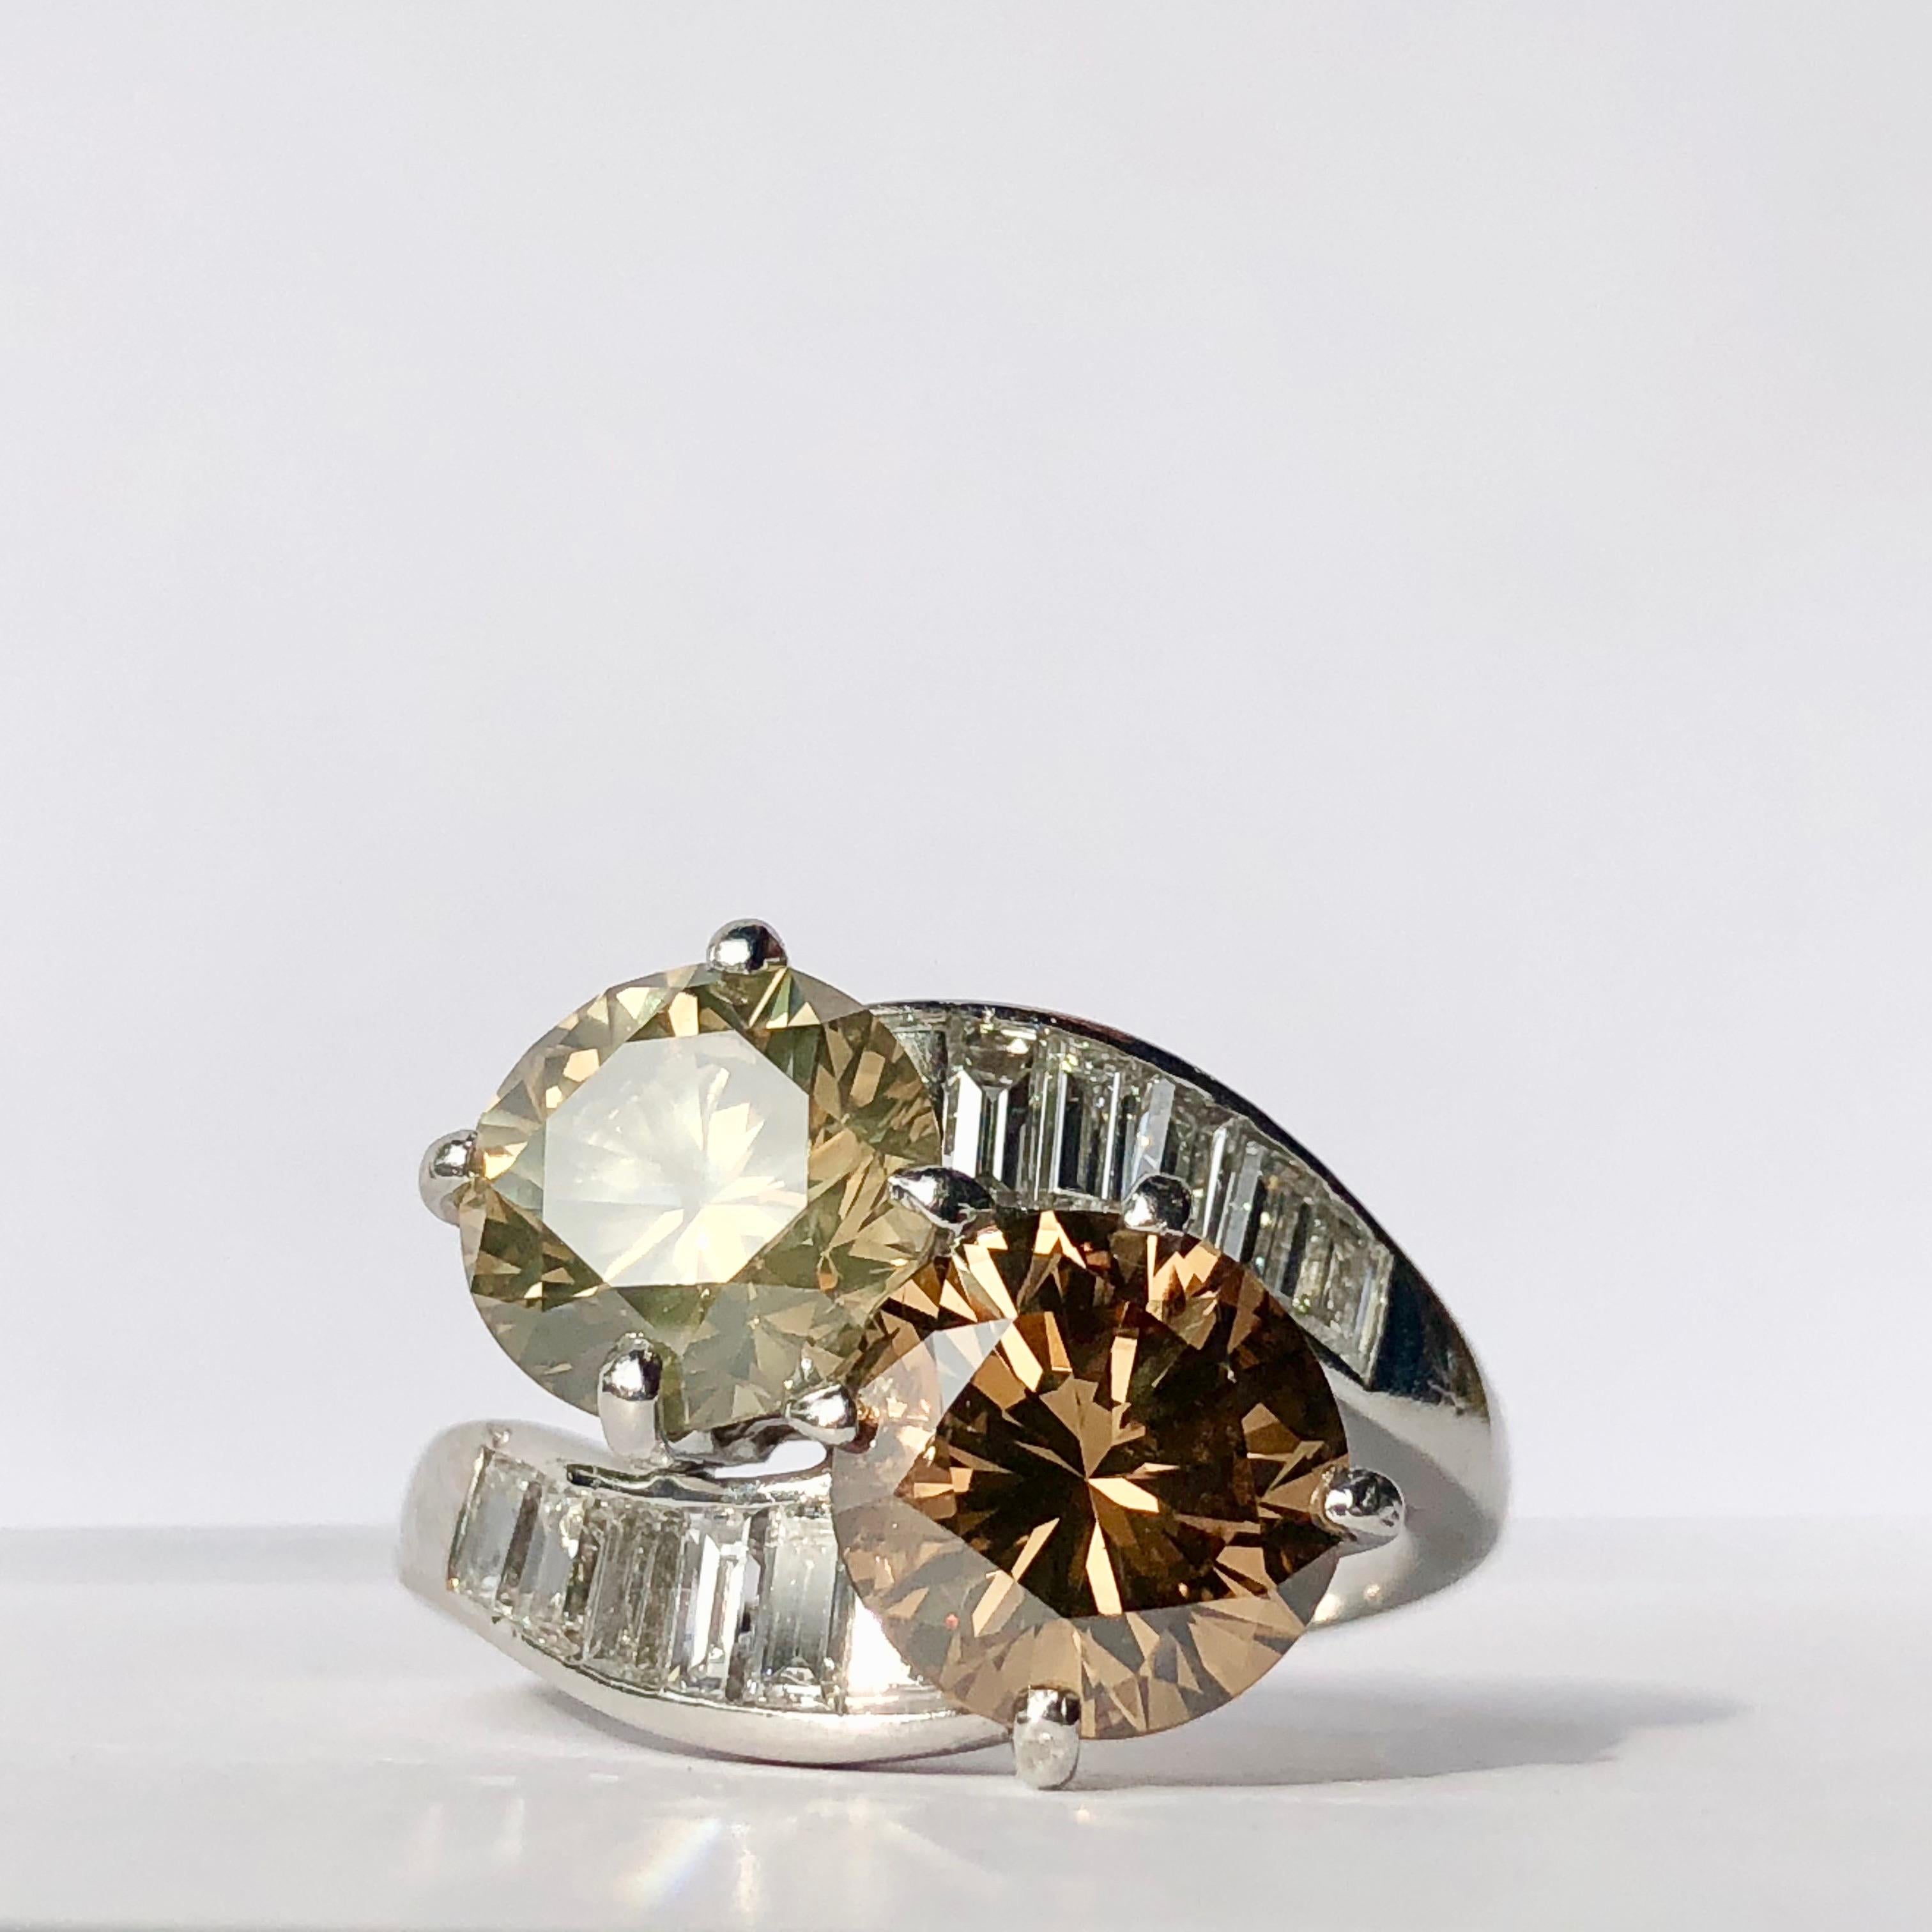 A Platinum, Champagne Colored Diamond and Chocolate/Cognac Diamond Toi et Moi Ring With White Diamond Baguette Shoulders 

An Incredible 5.40 ct Total Weight 

This really is a thing of beauty 

The warm, radiant glow of a cognac diamond makes for